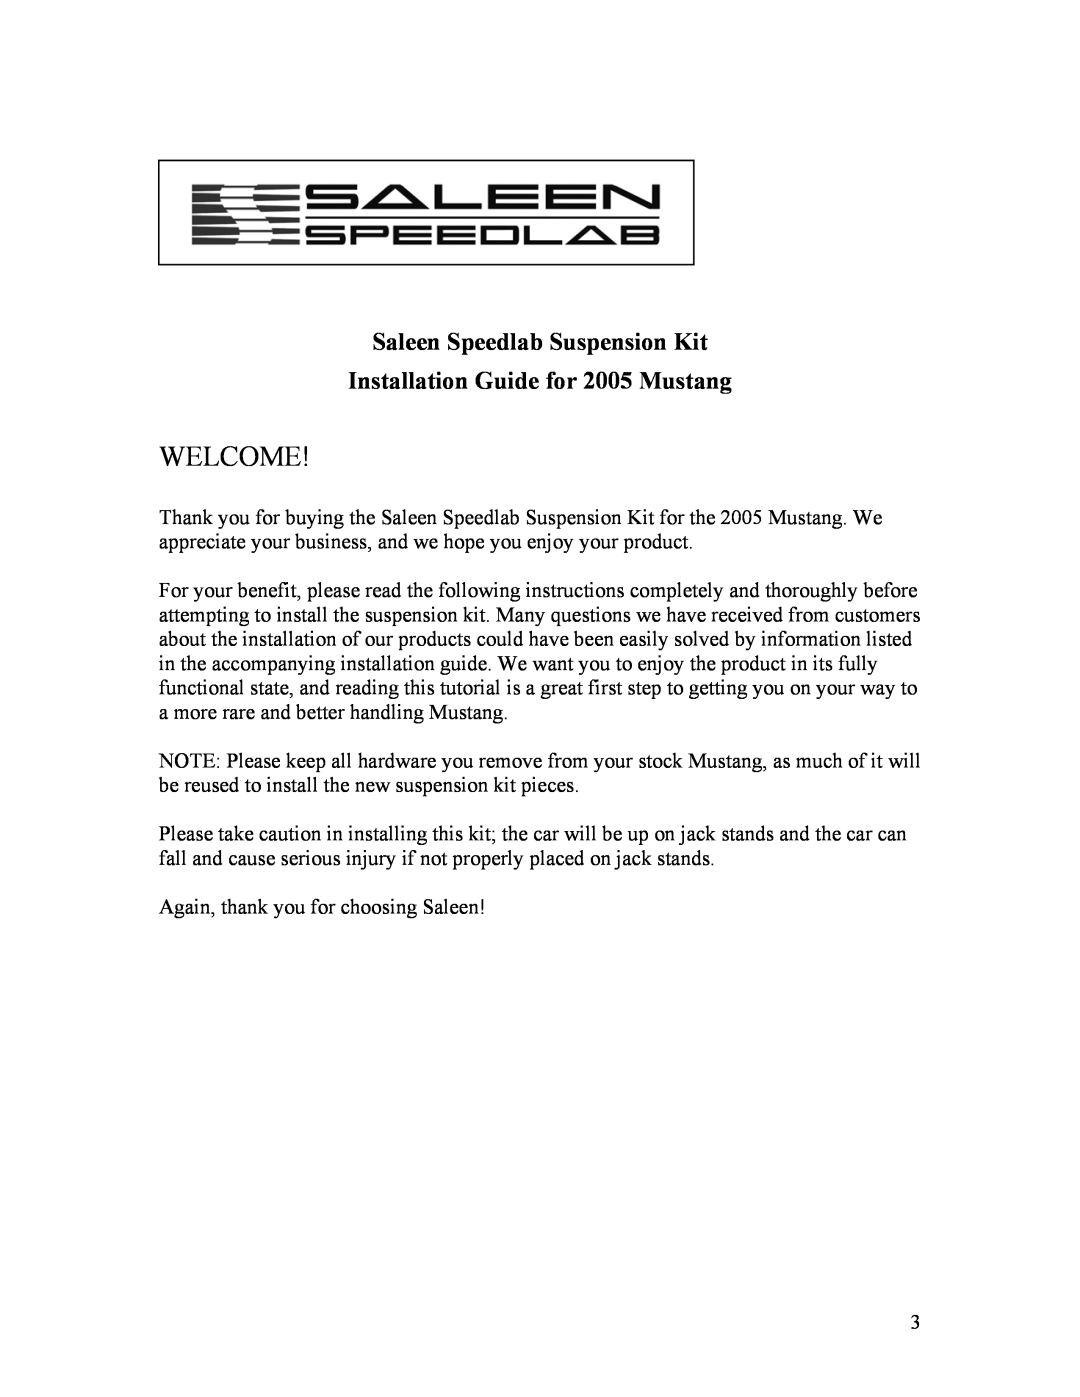 Saleen 10-8002-C11790A installation manual Saleen Speedlab Suspension Kit, Installation Guide for 2005 Mustang, Welcome 